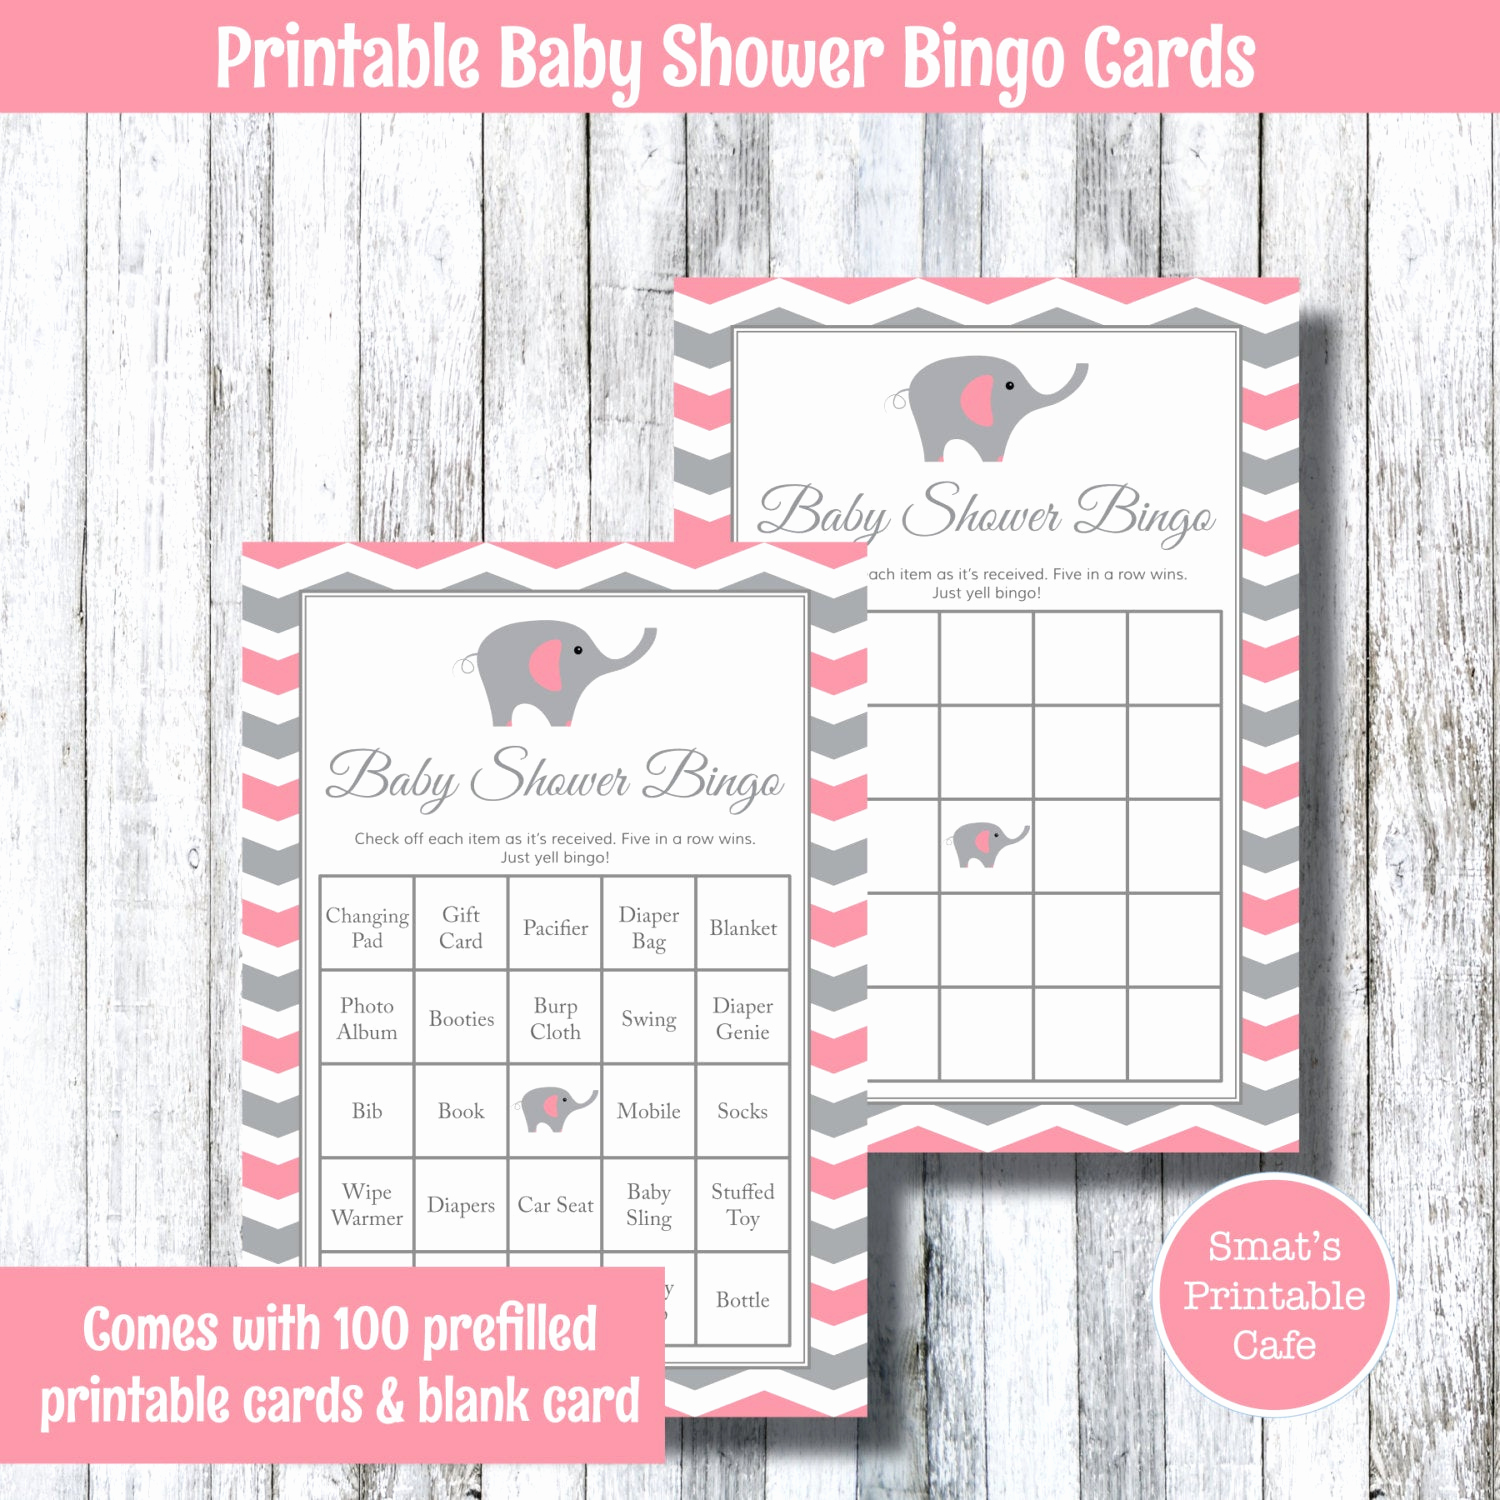 Printable Baby Shower Cards Awesome Pink &amp; Grey Elephant with Chevron themed Baby Shower Bingo